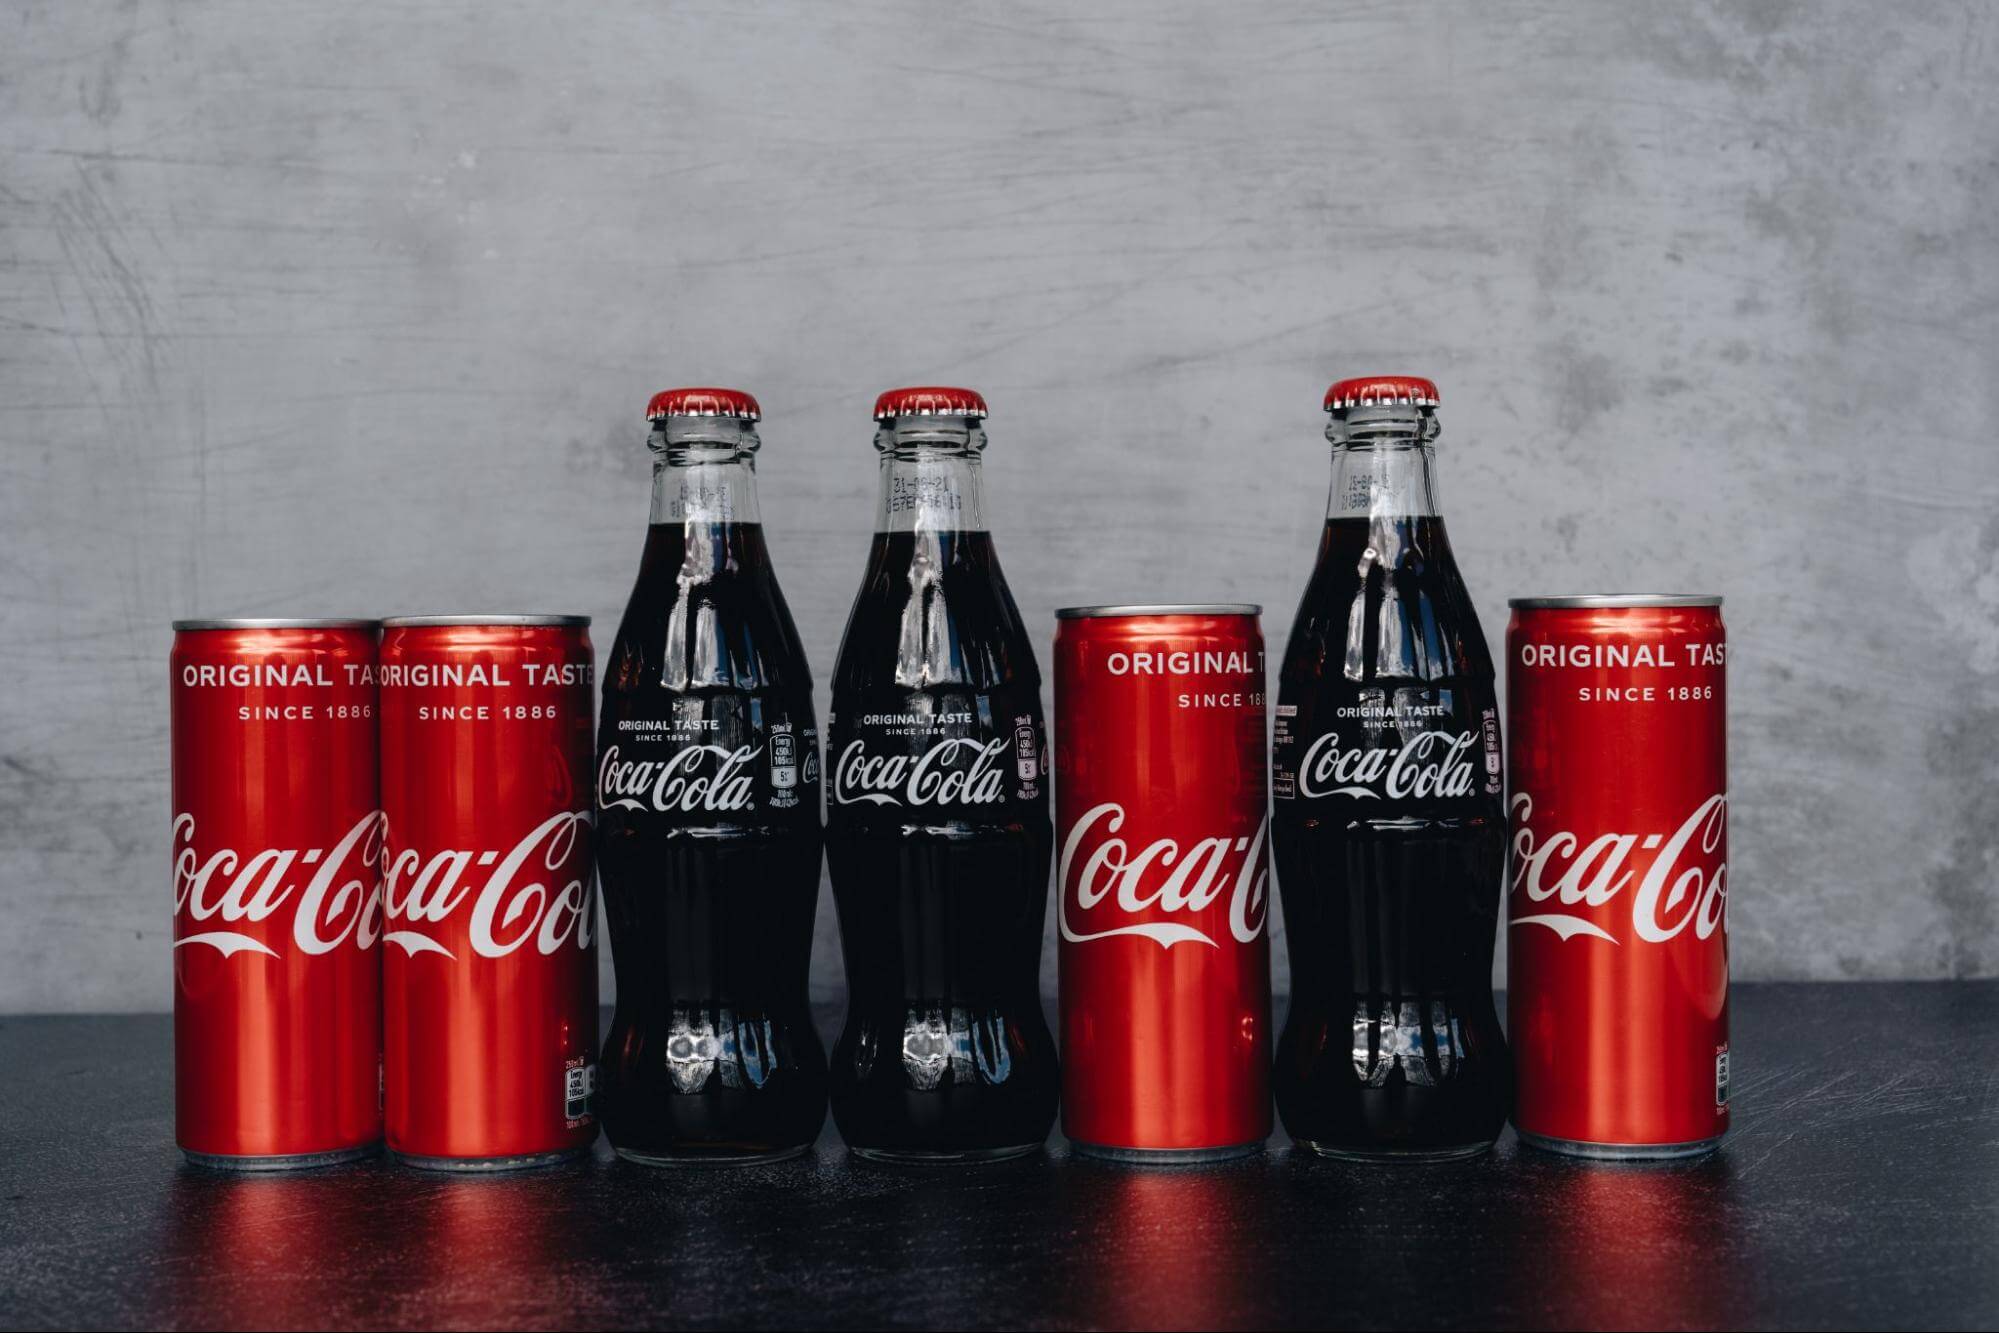 Coca-Cola brand attributes: bottles and cans showing the unique script font, the red cans, and the hourglass bottles.